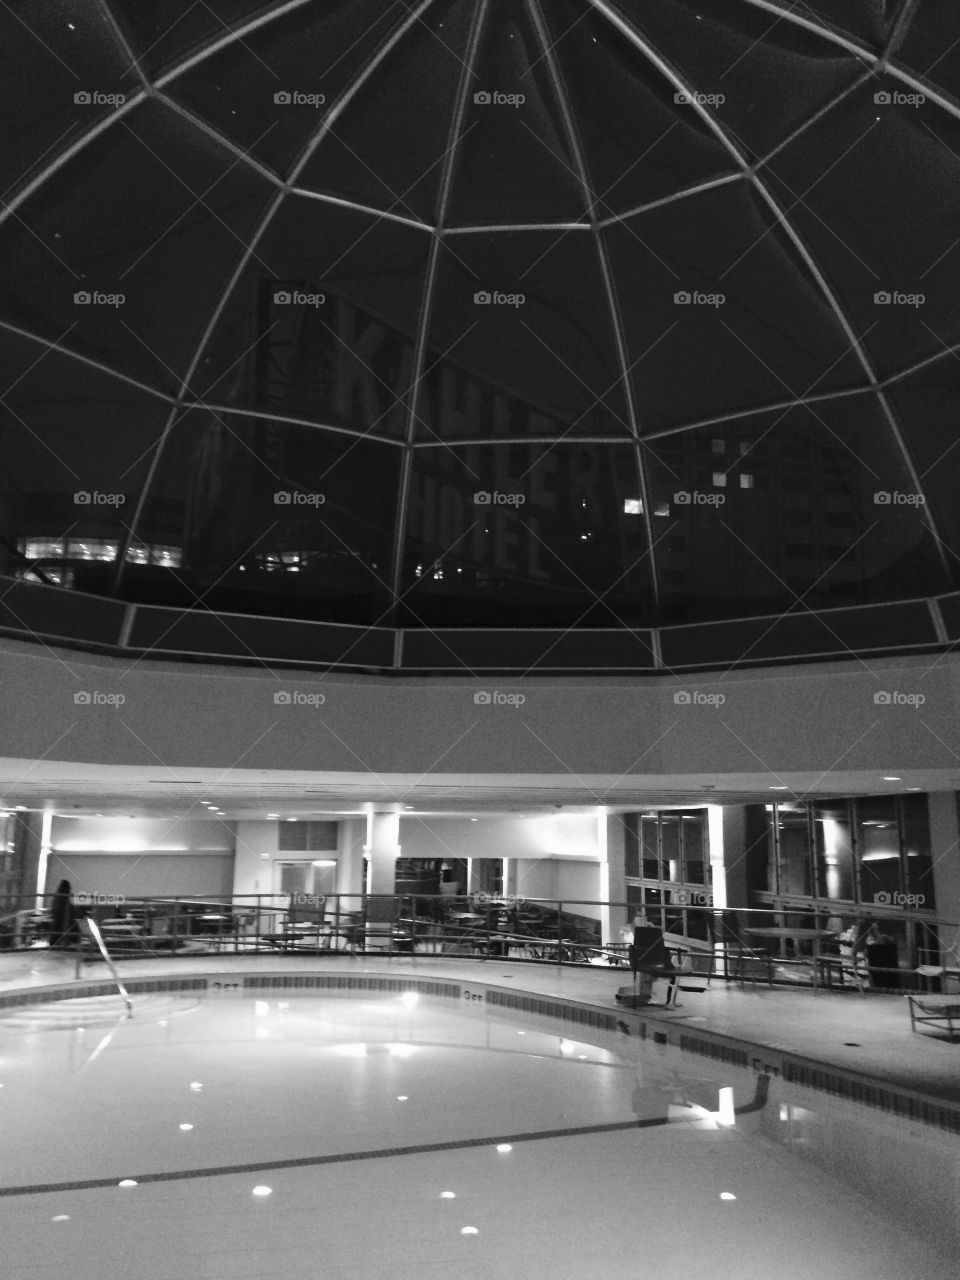 Dome at Kahler Hotel. I stayed at this hotel in Minnesota for medical reasons across from the Mayo Clinic. This is the dome on the pool.